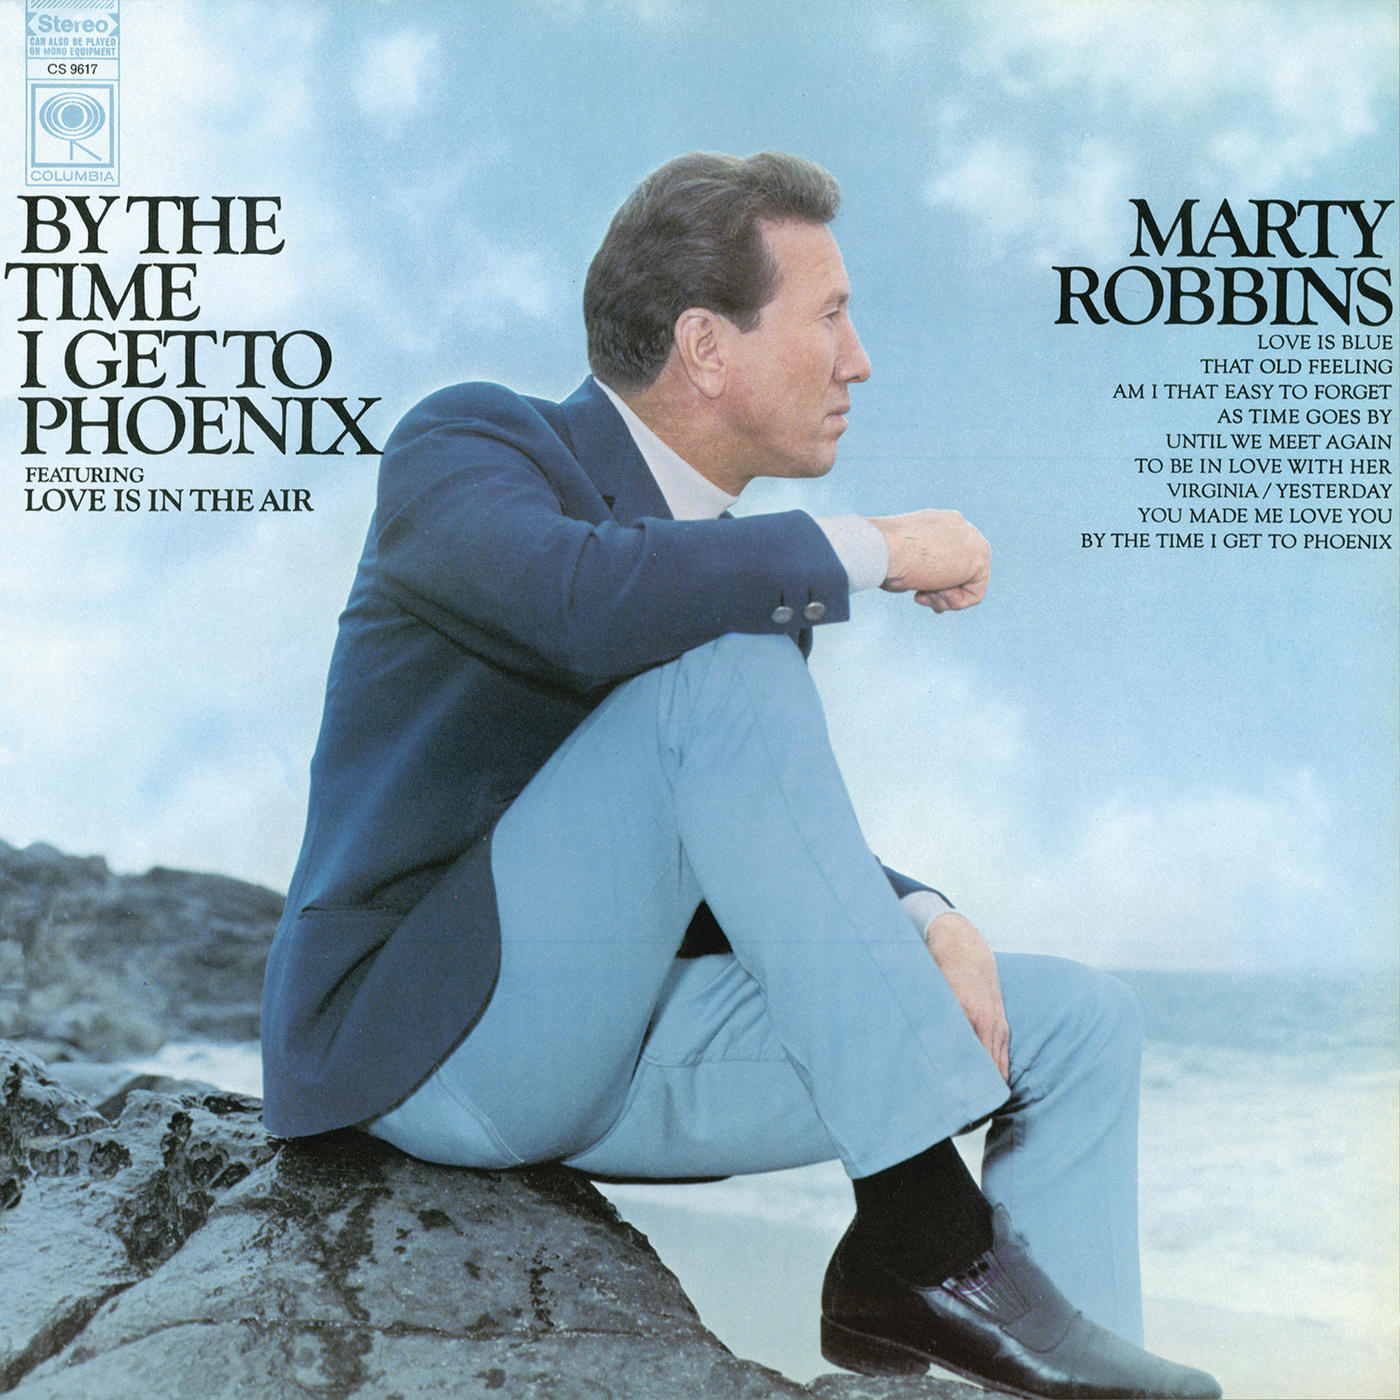 That Old Feelling/Marty Robbins